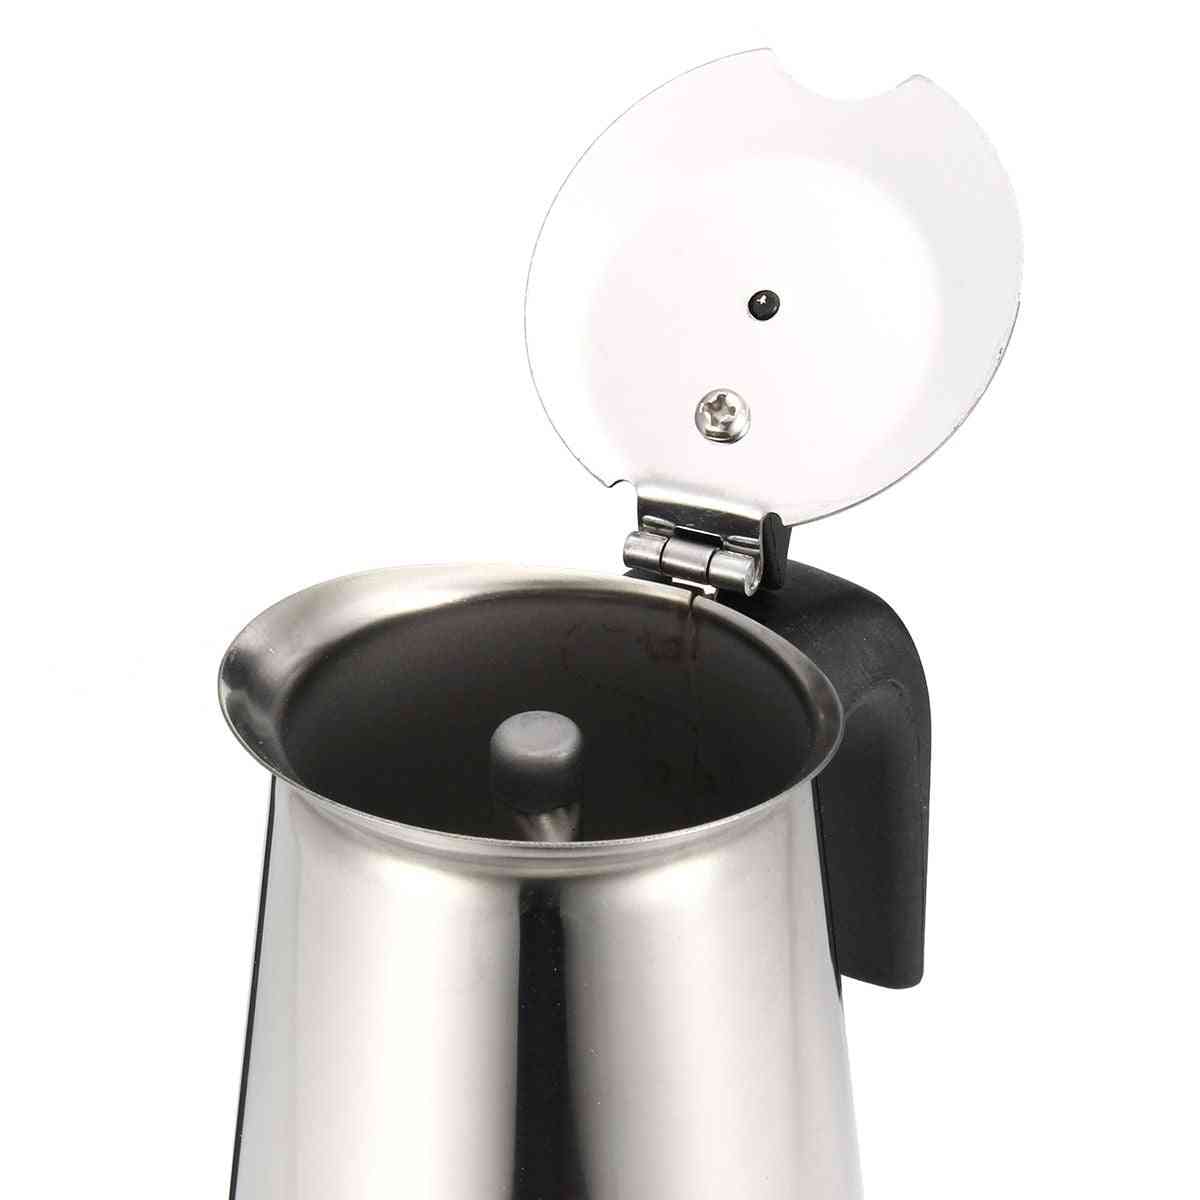 Stainless Steel Espresso Coffee Maker, Moka Pot With Electric Stove, Filter Kettle